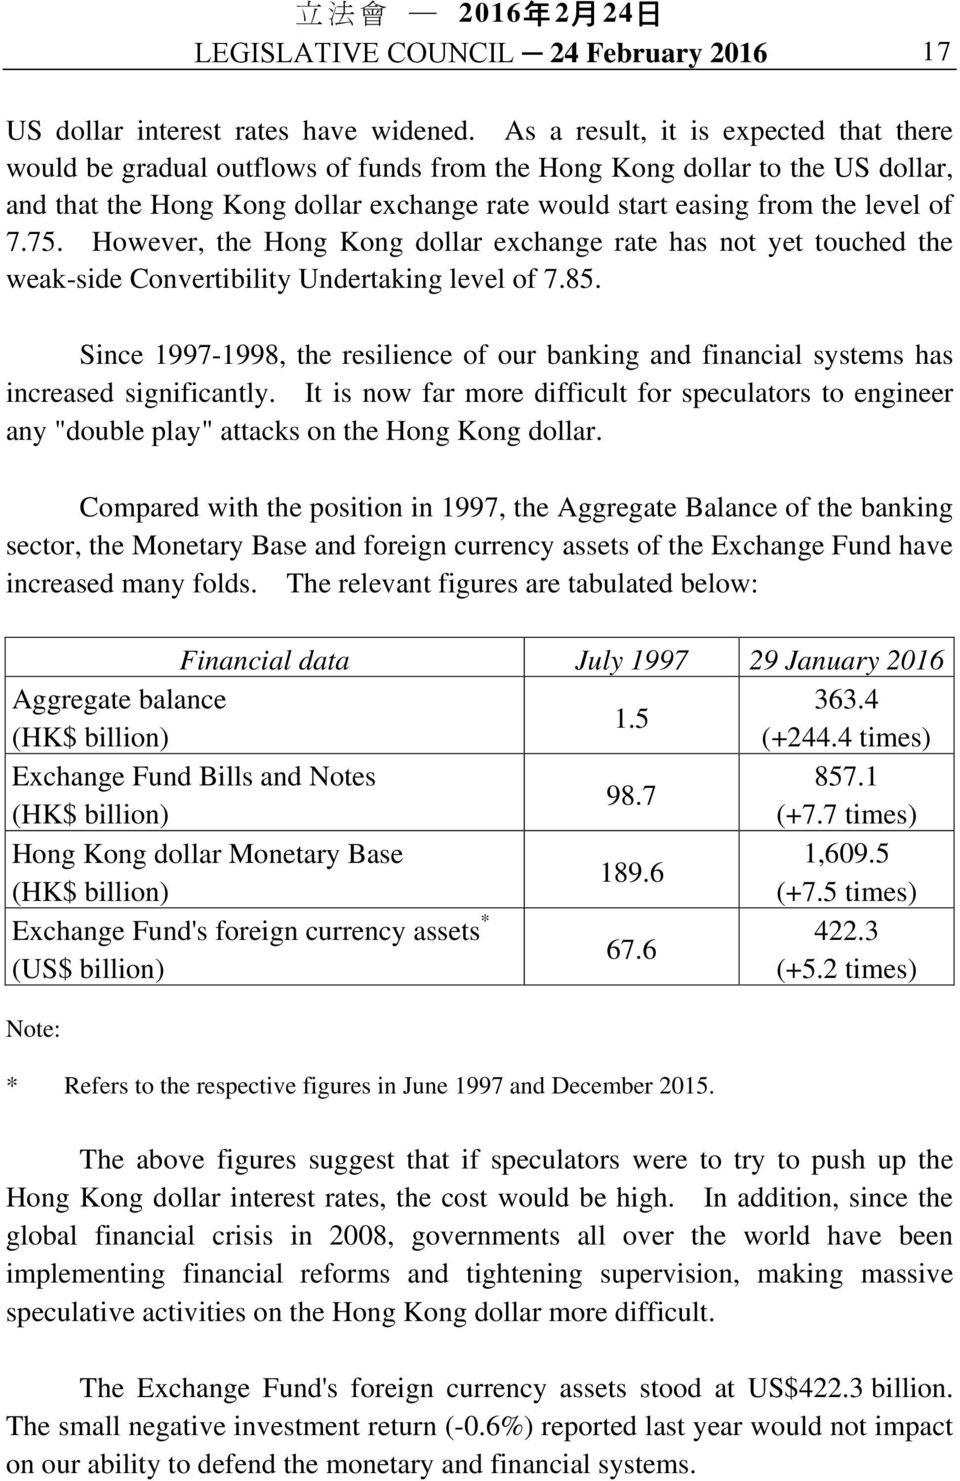 7.75. However, the Hong Kong dollar exchange rate has not yet touched the weak-side Convertibility Undertaking level of 7.85.